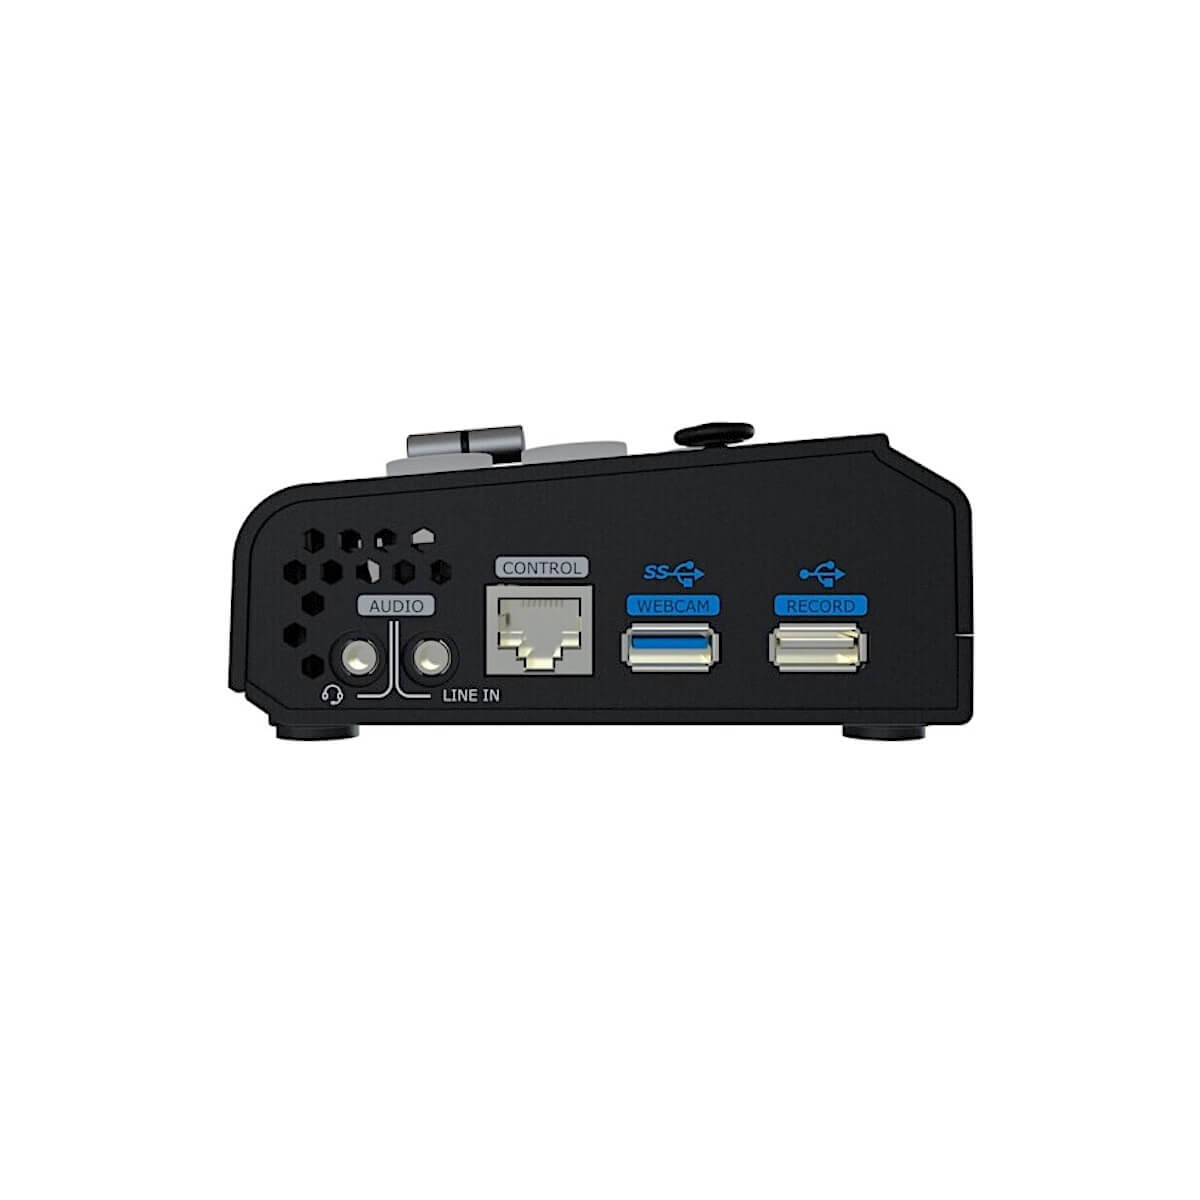 RGBlink mini-pro 4K Compact Streaming Switcher with PTZ Camera Control